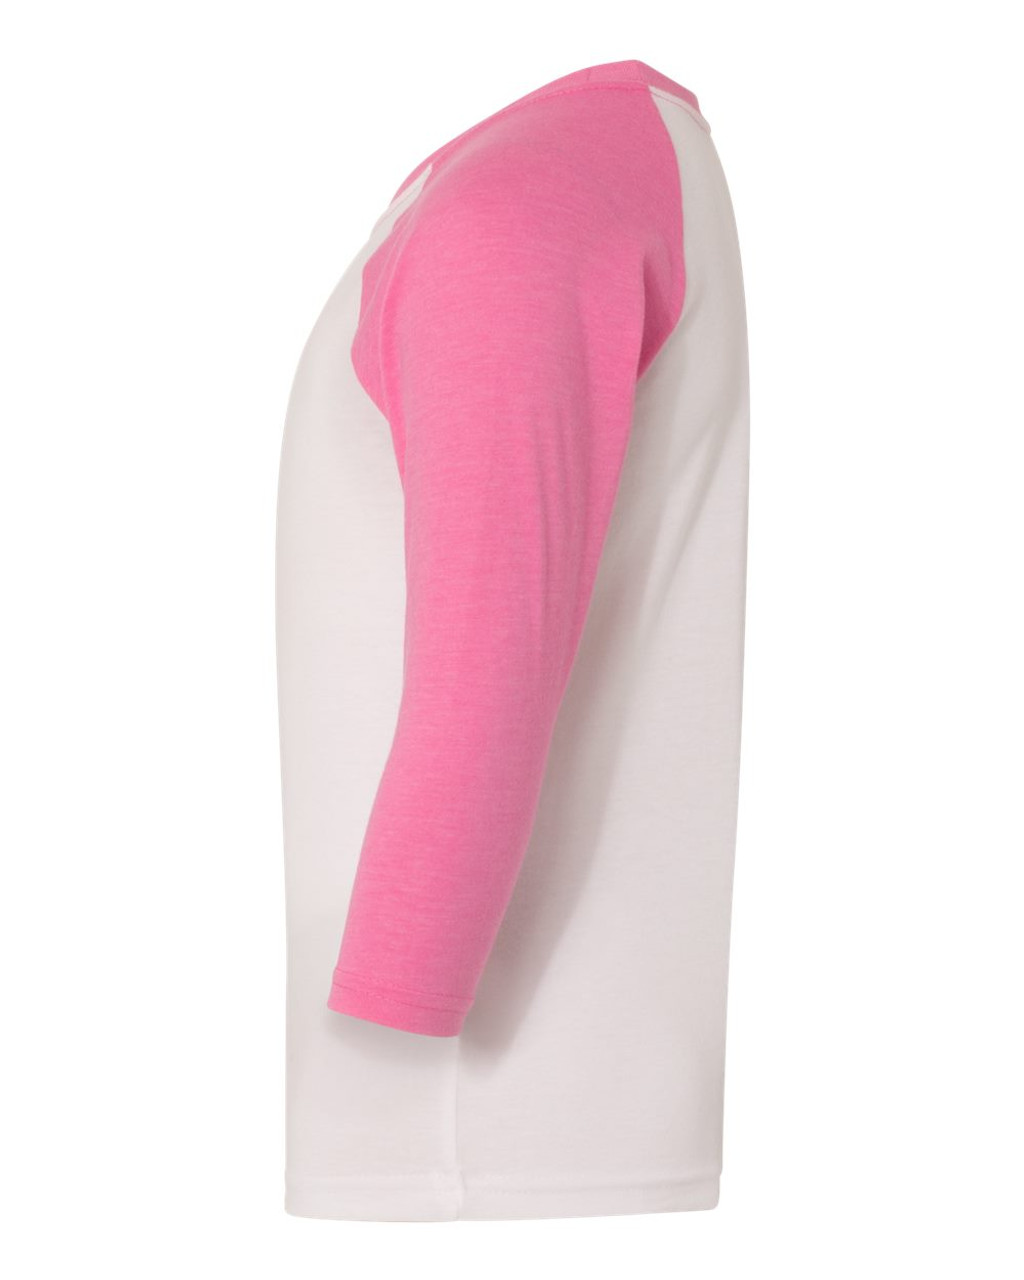 Hot Pink Sleeves/ White Body